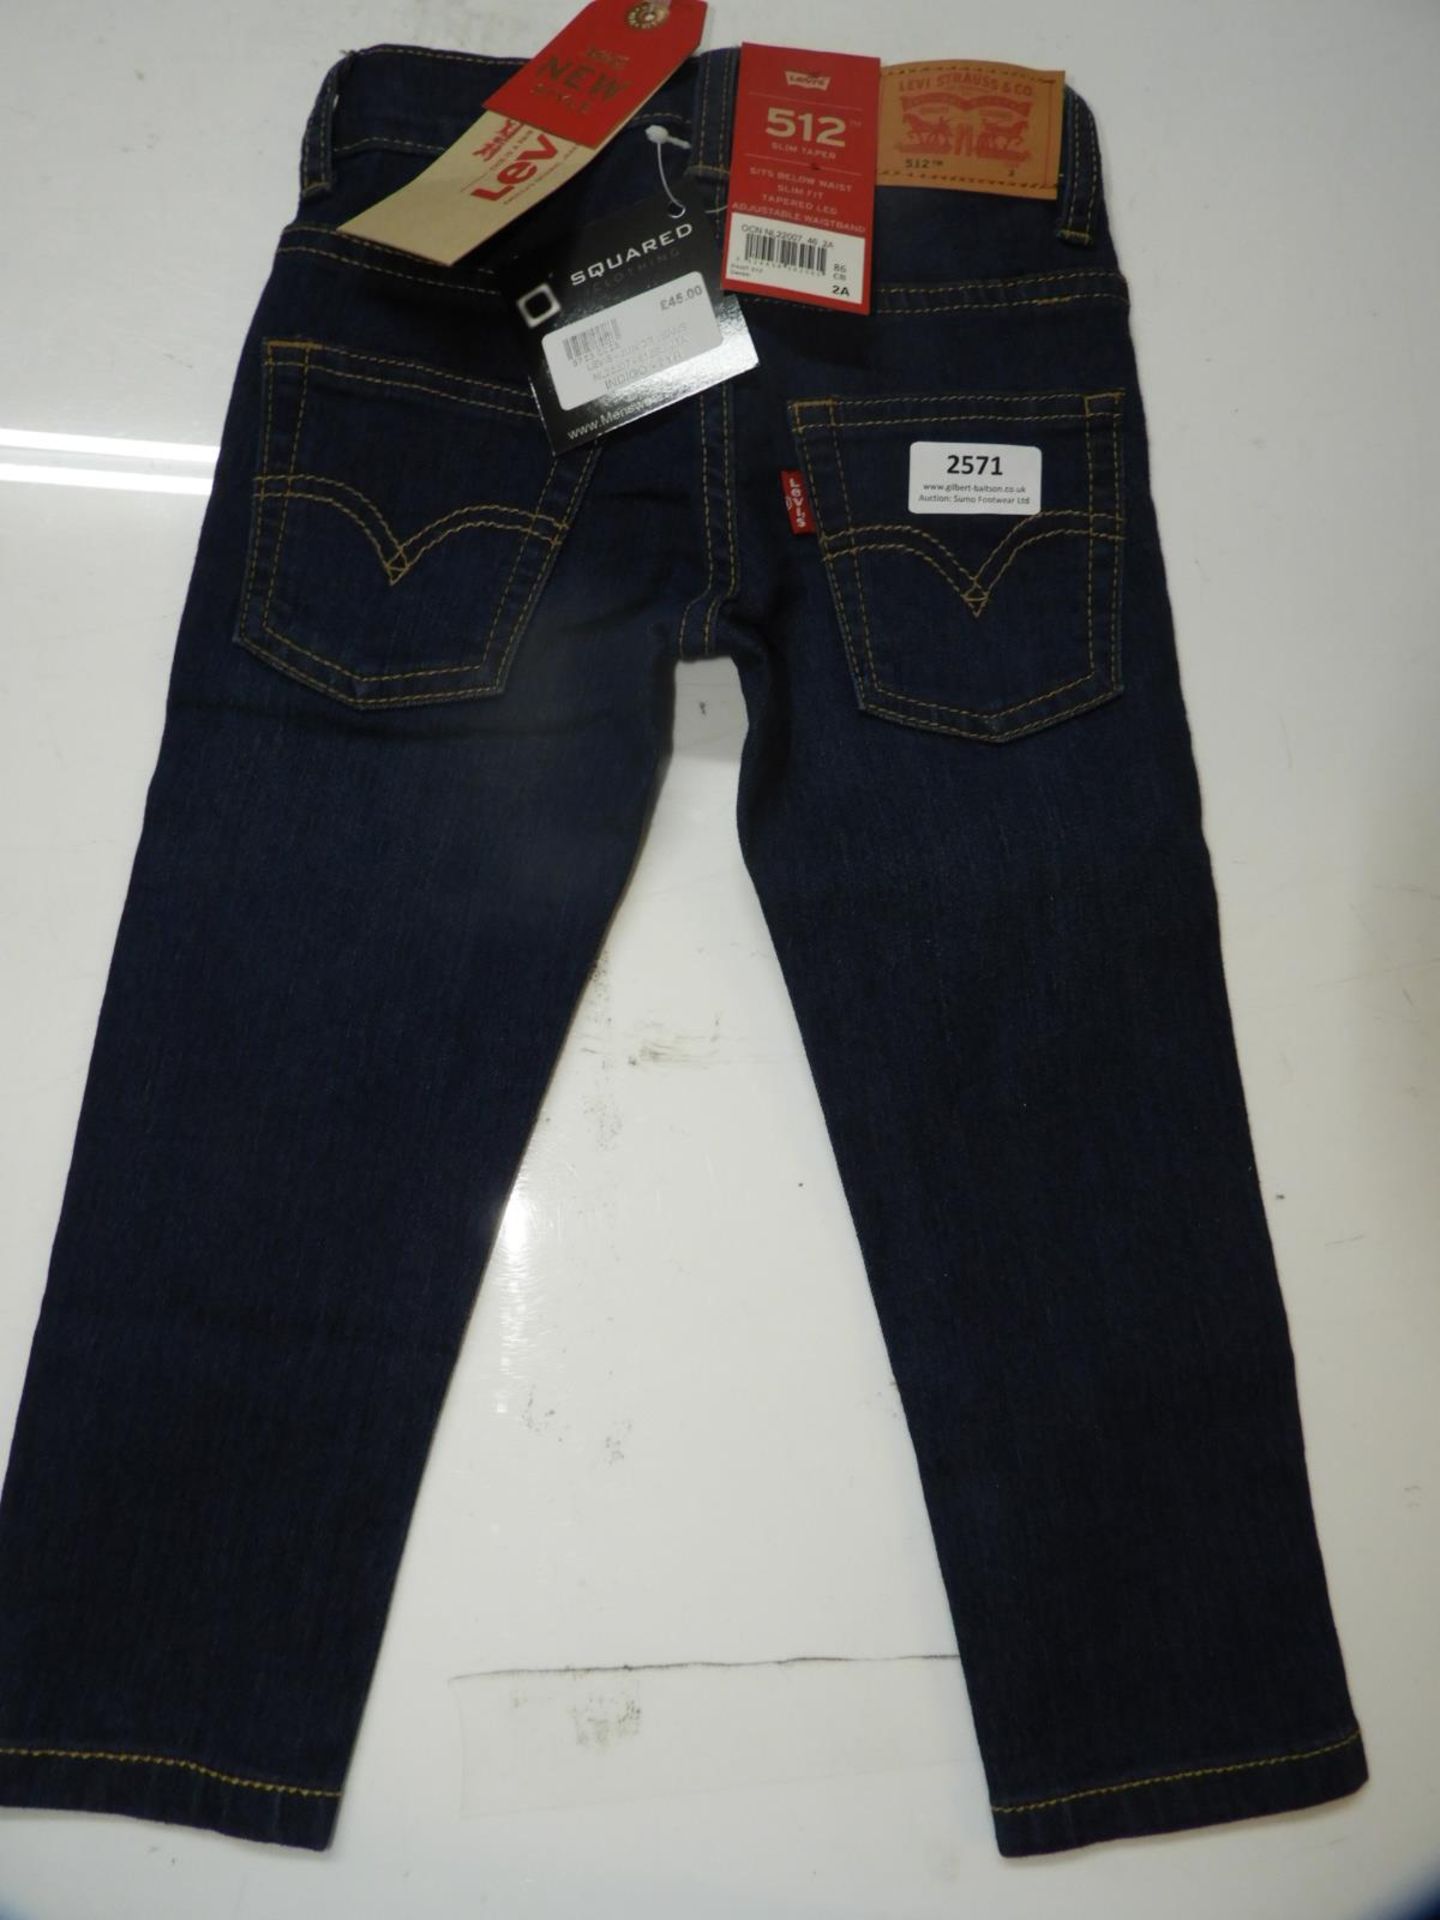 Levi 512 Children's Jeans Size: 2 Years